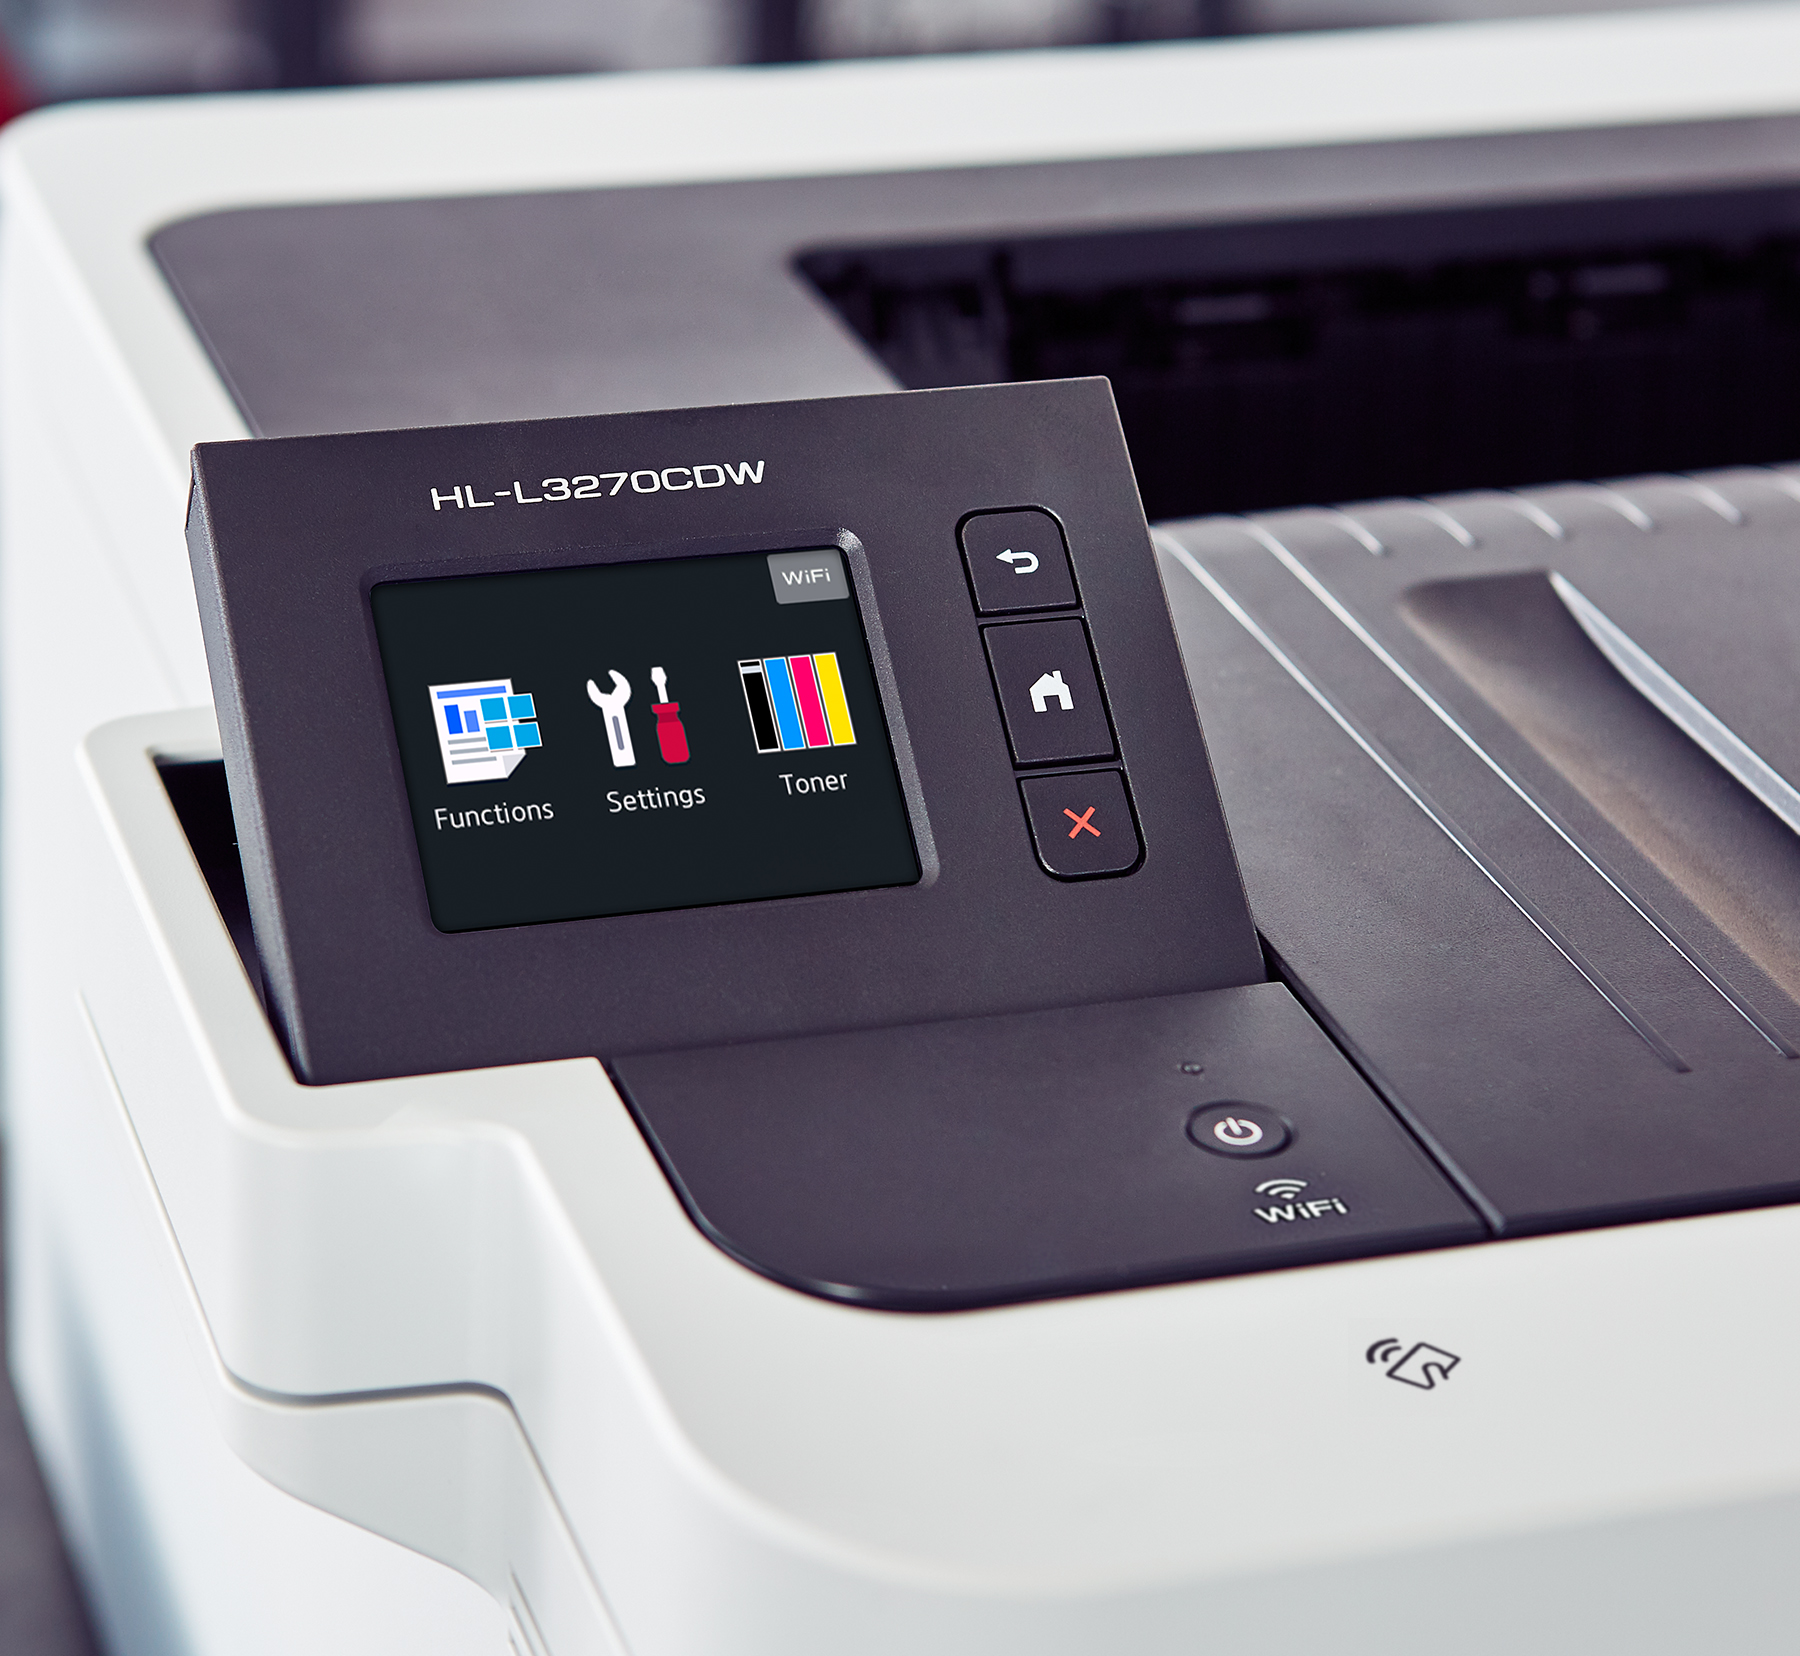 Brother HL-L3270CDW Compact Digital Color Printer Providing Laser Quality Results with NFC, Wireless and Duplex Printing - image 5 of 9